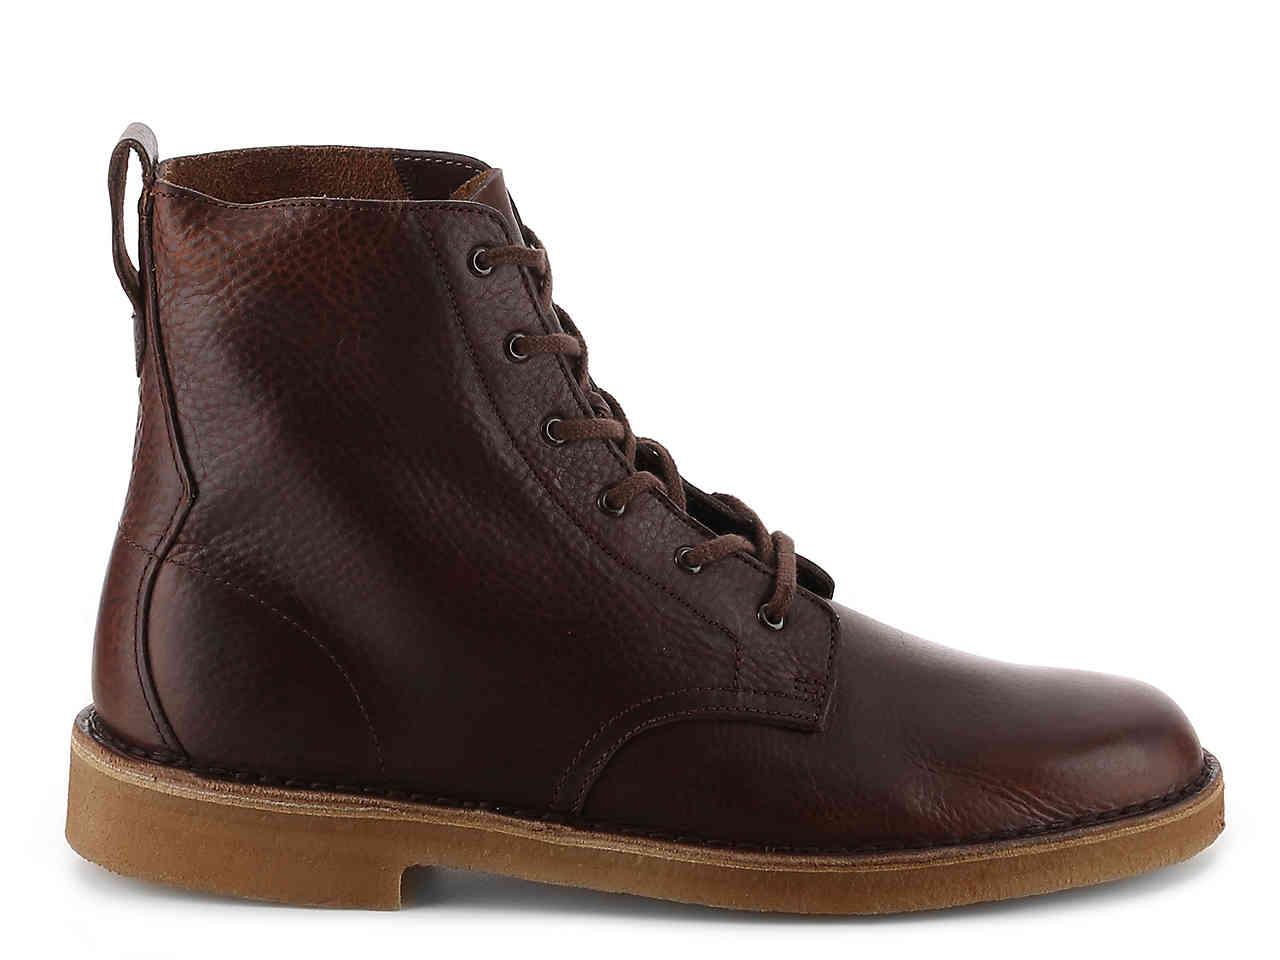 Leather Desert Boot in Rust (Brown) for Men - Lyst